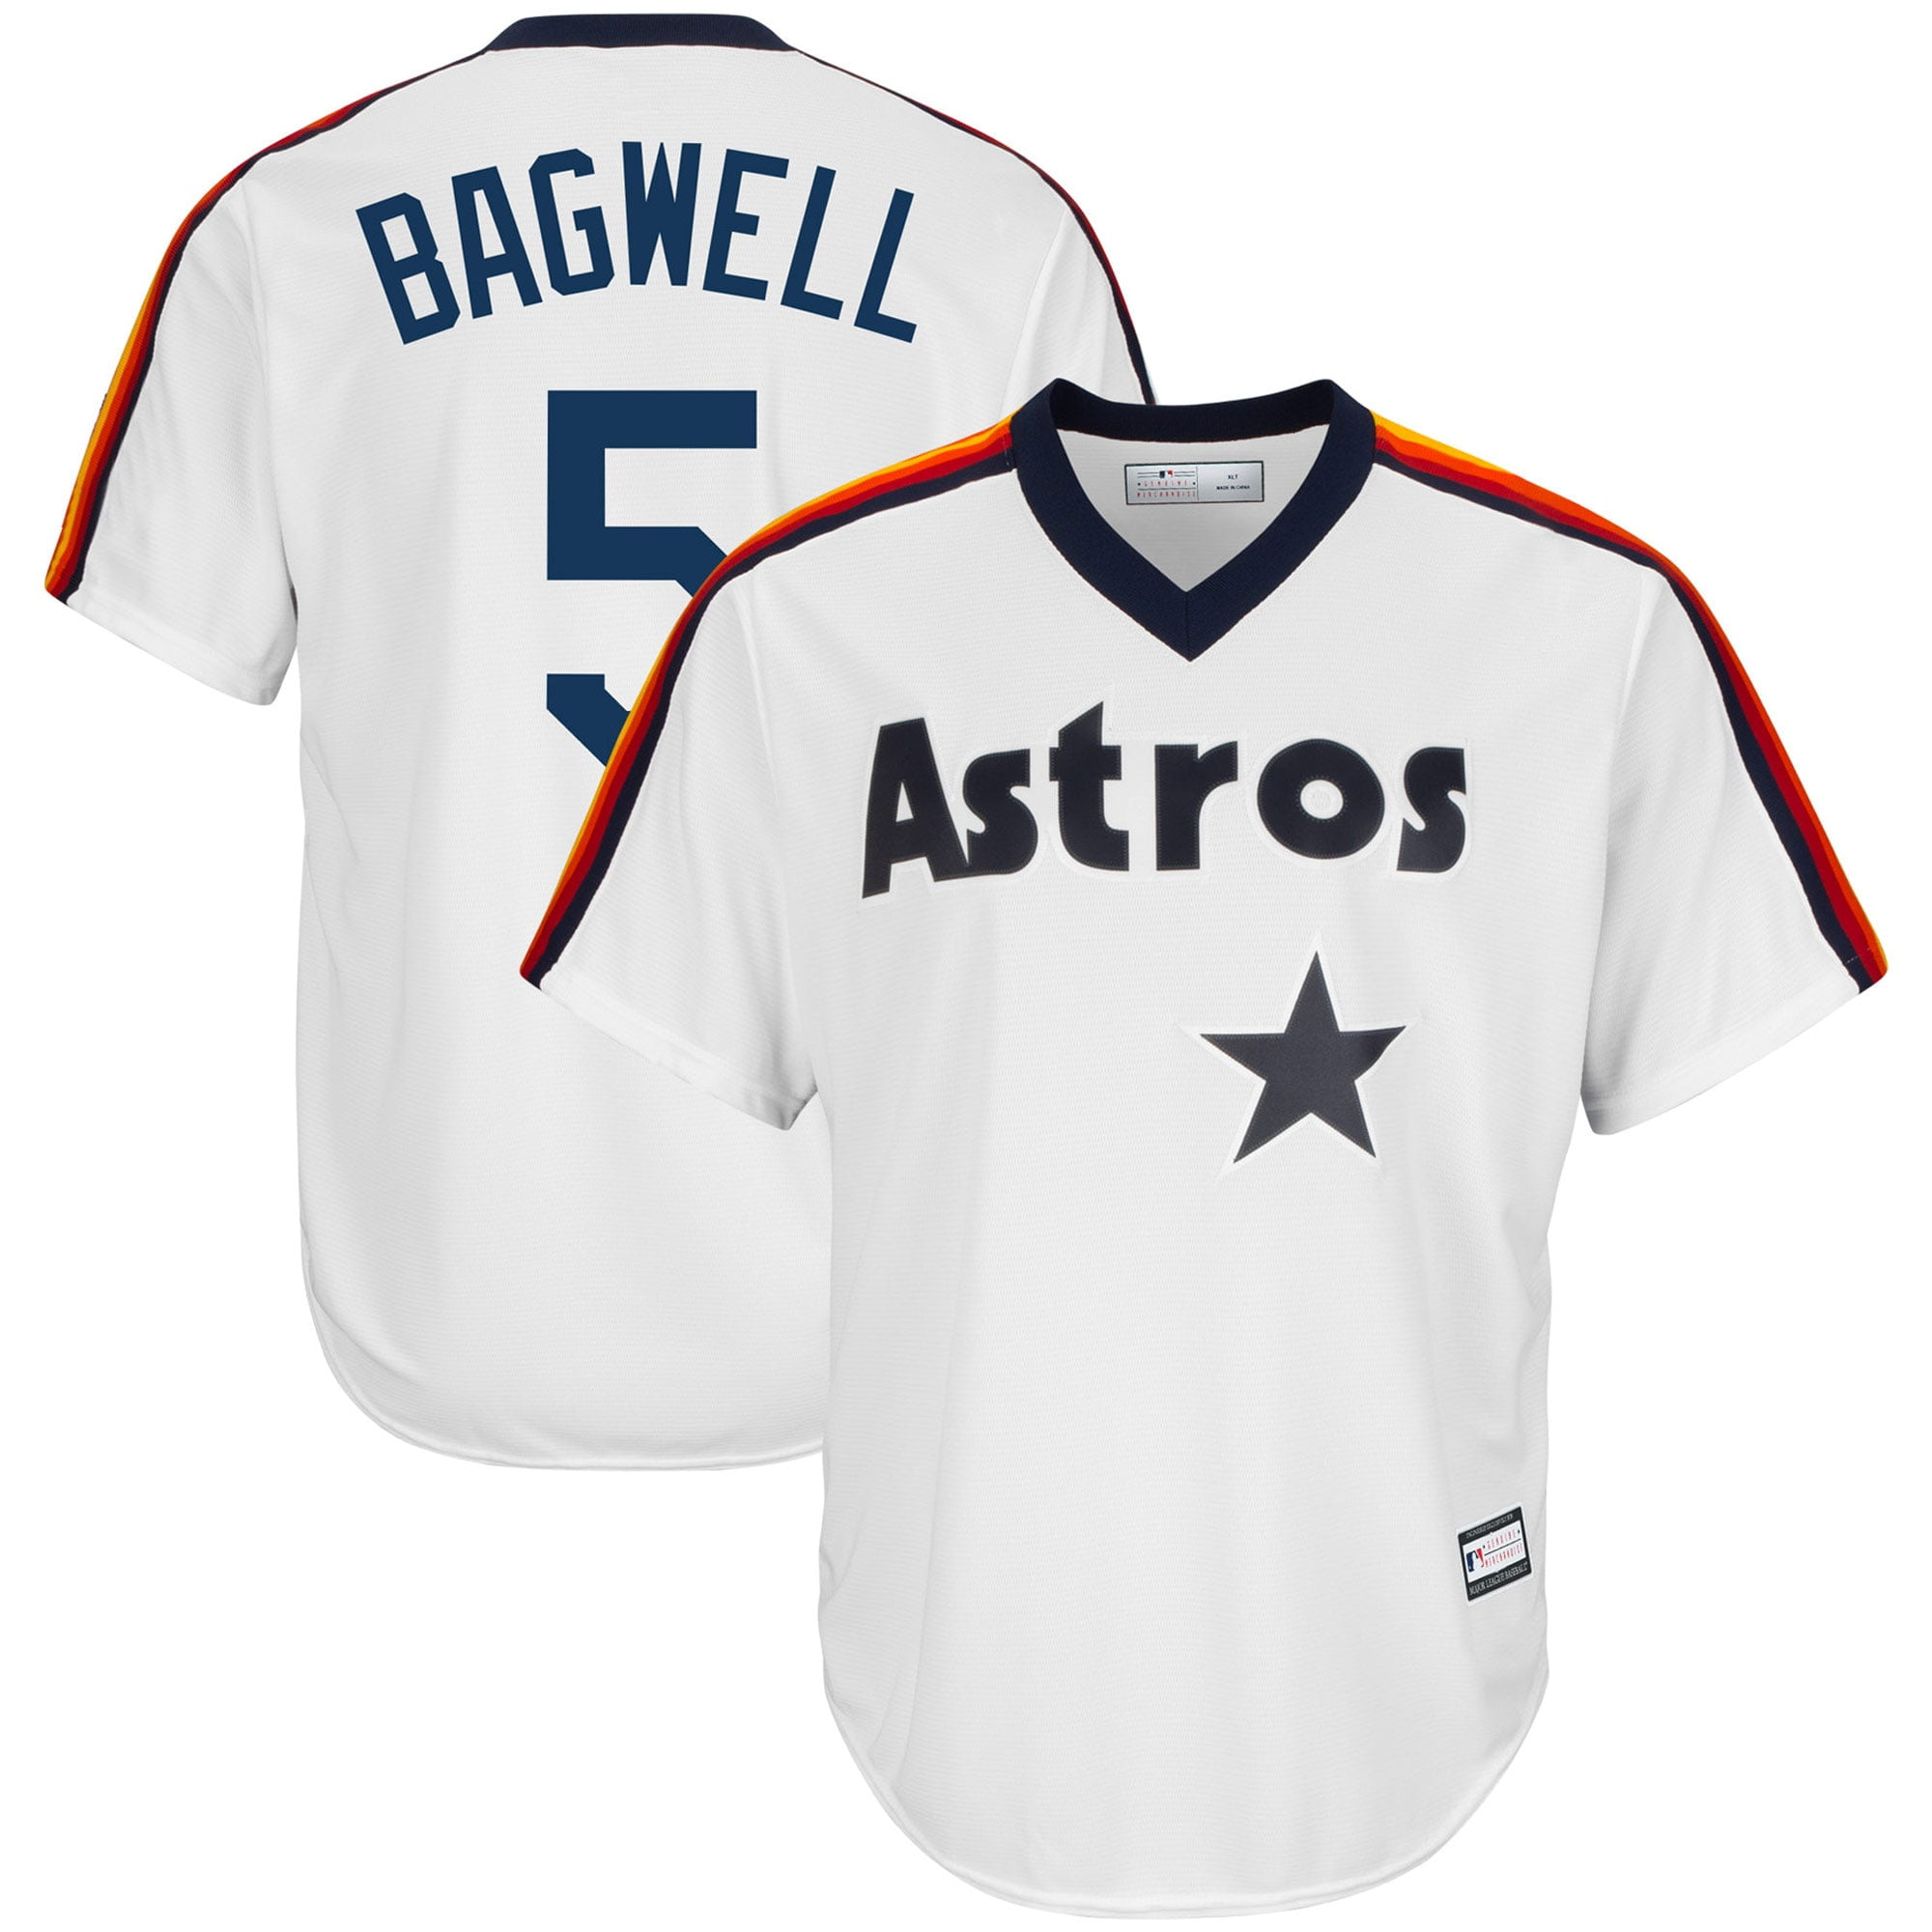 bagwell jersey